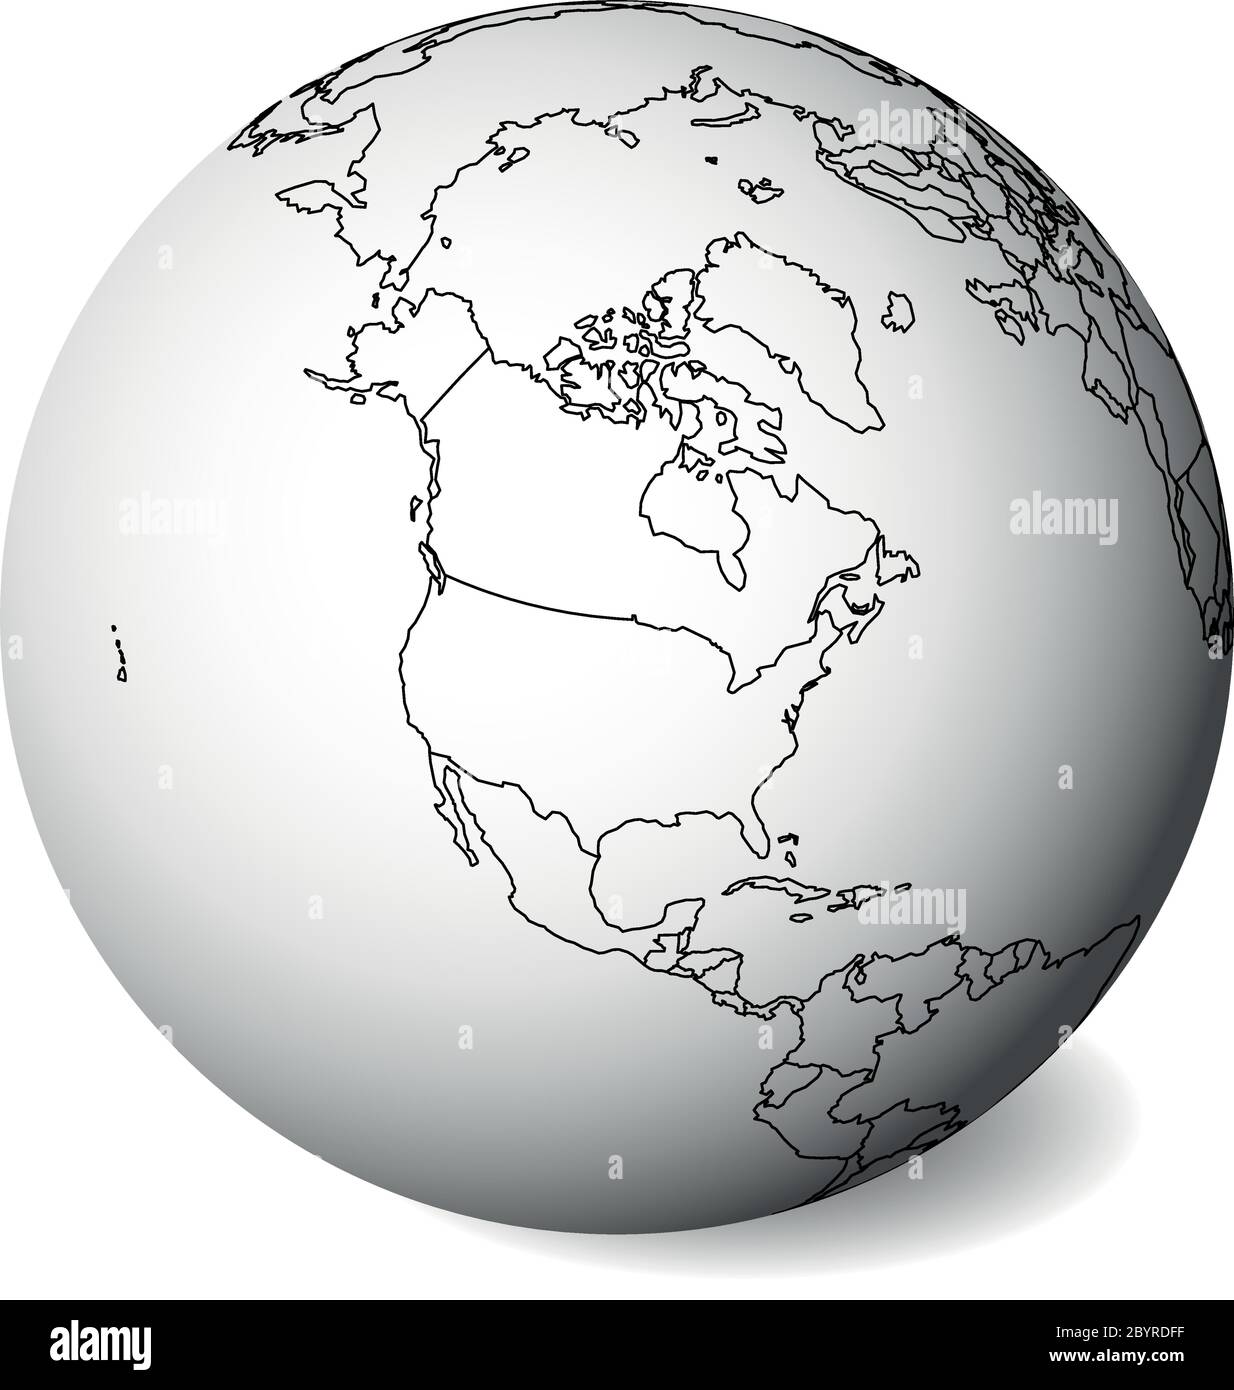 Blank political map of North America. 3D Earth globe with black outline map. Vector illustration. Stock Vector